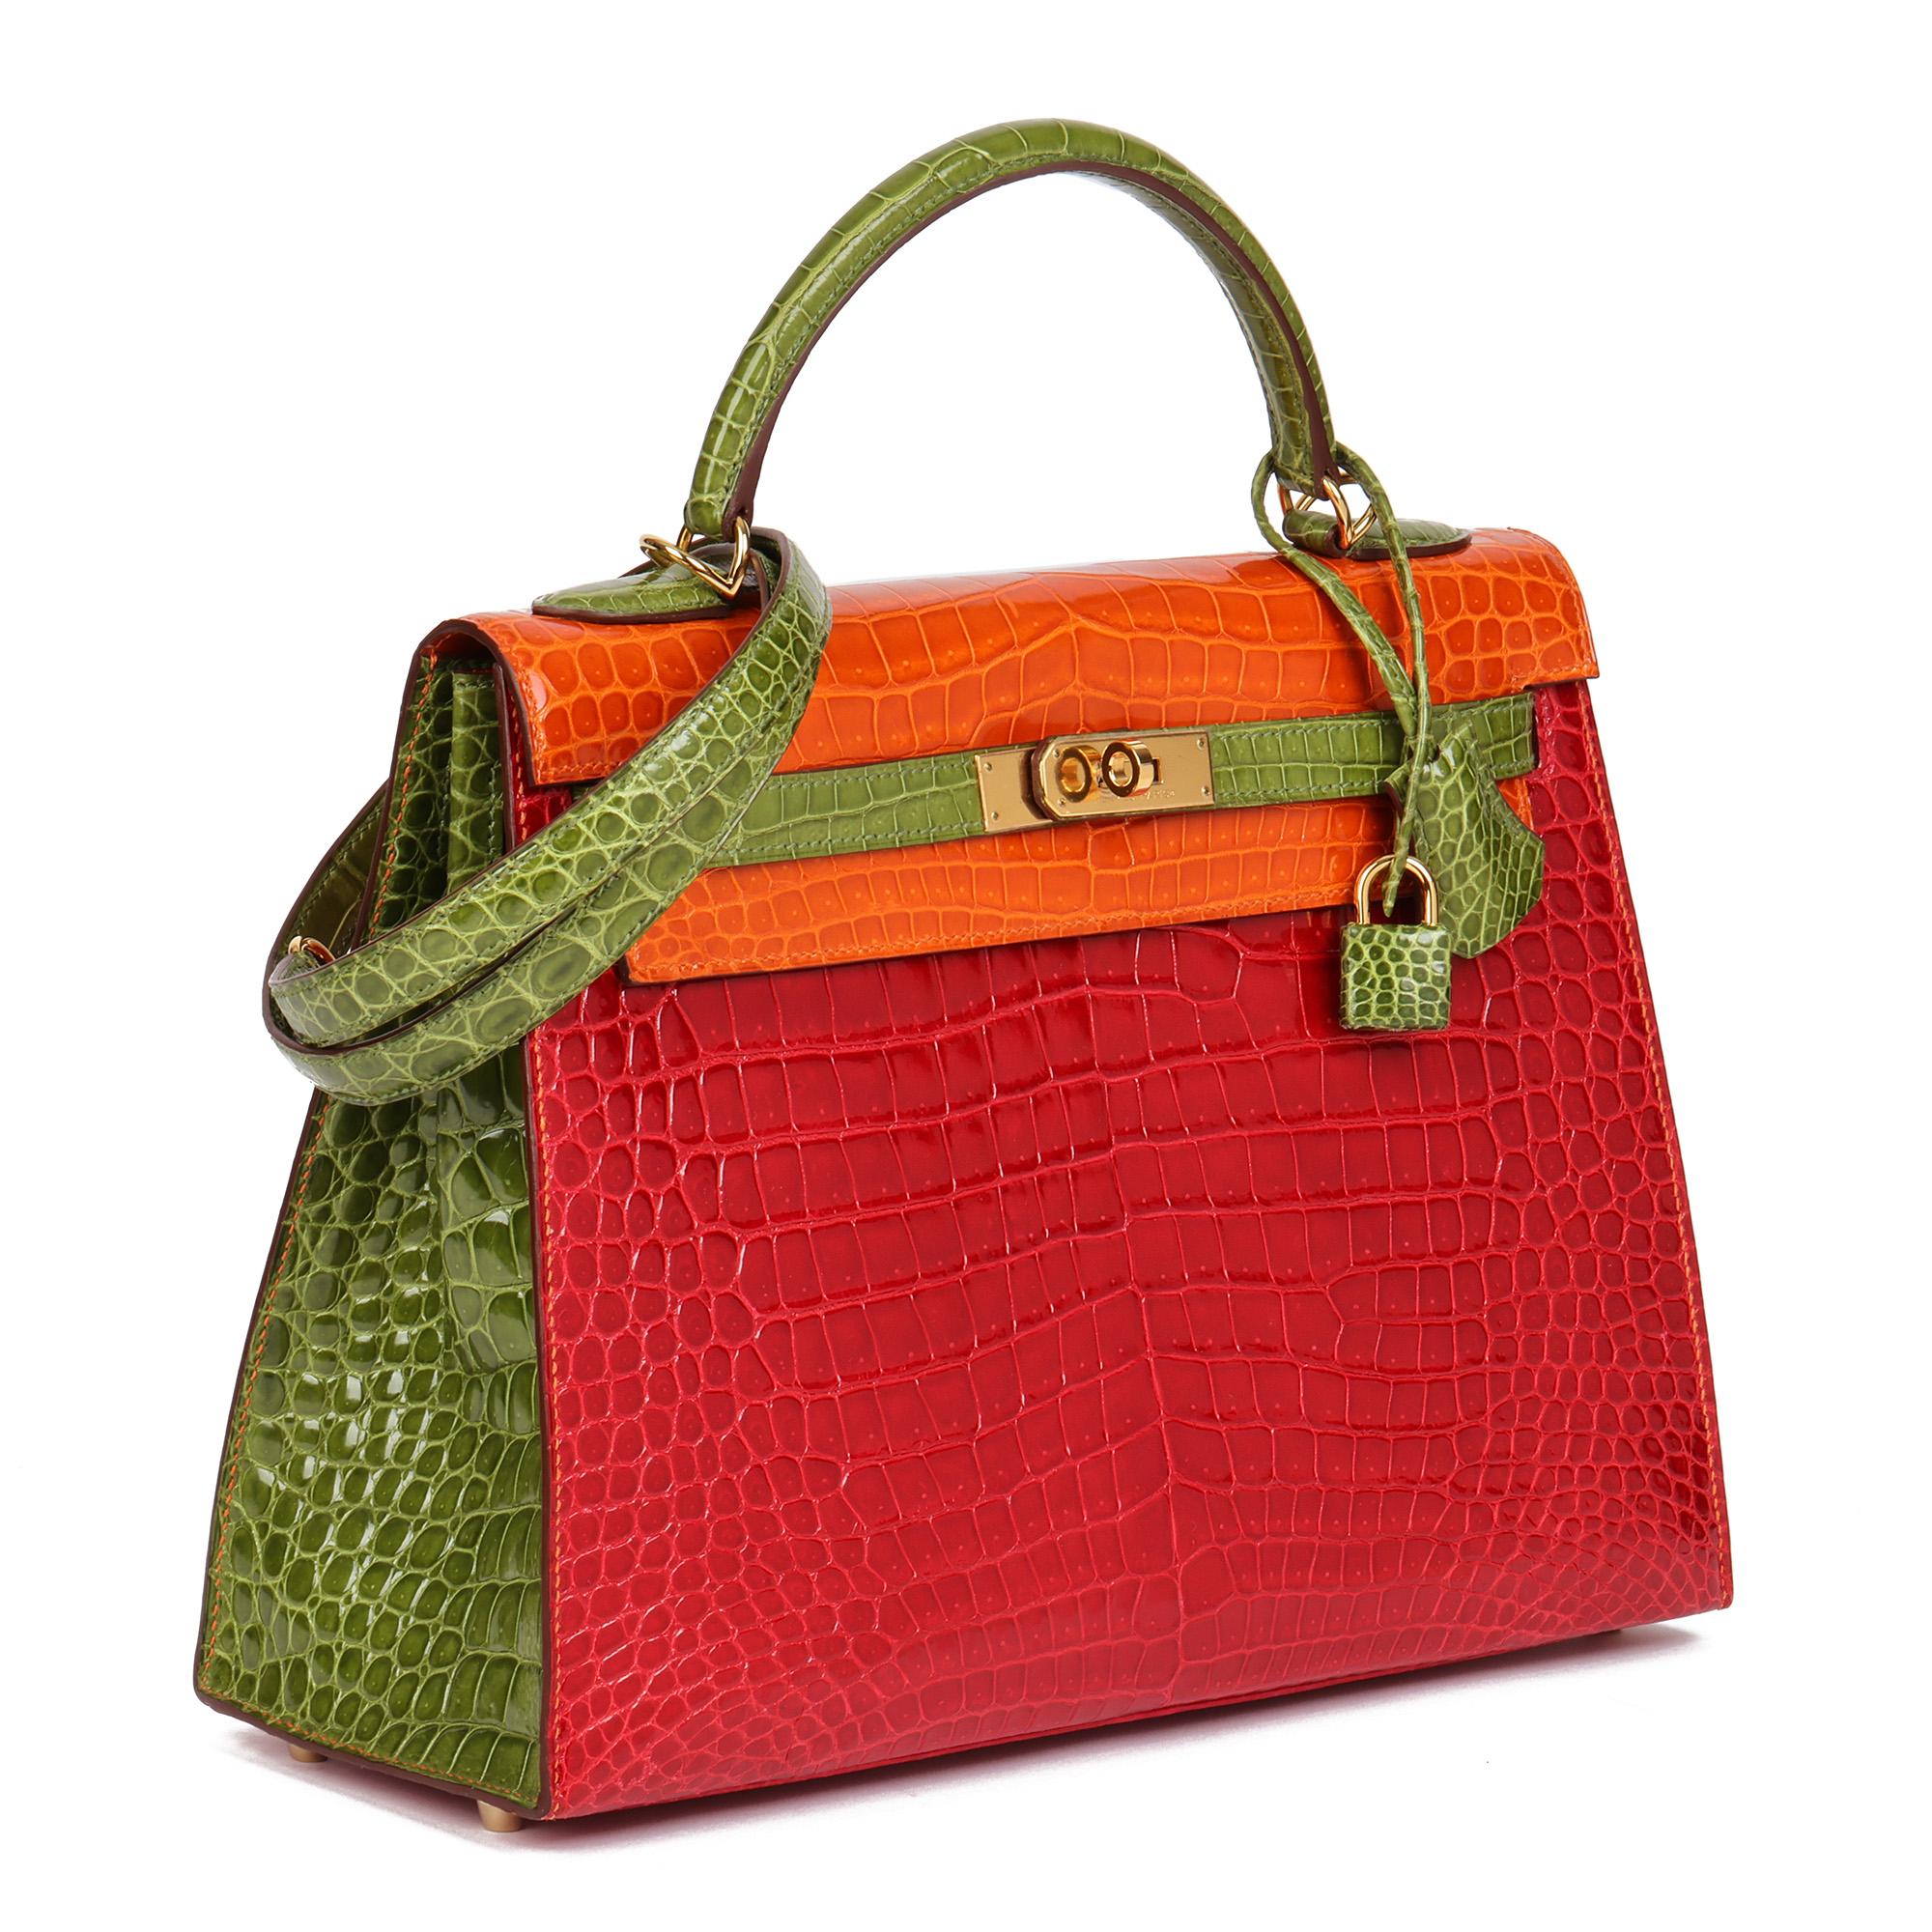 Hermès Braise, Tangering & Vert Anis Shiny Porosus Crocodile Leather Special Order HSS Kelly 32cm Sellier

CONDITION NOTES
This item is in unworn condition.

XUPES REFERENCE	JJLG101
BRAND	Hermès
MODEL	Kelly 32cm
LIMITED